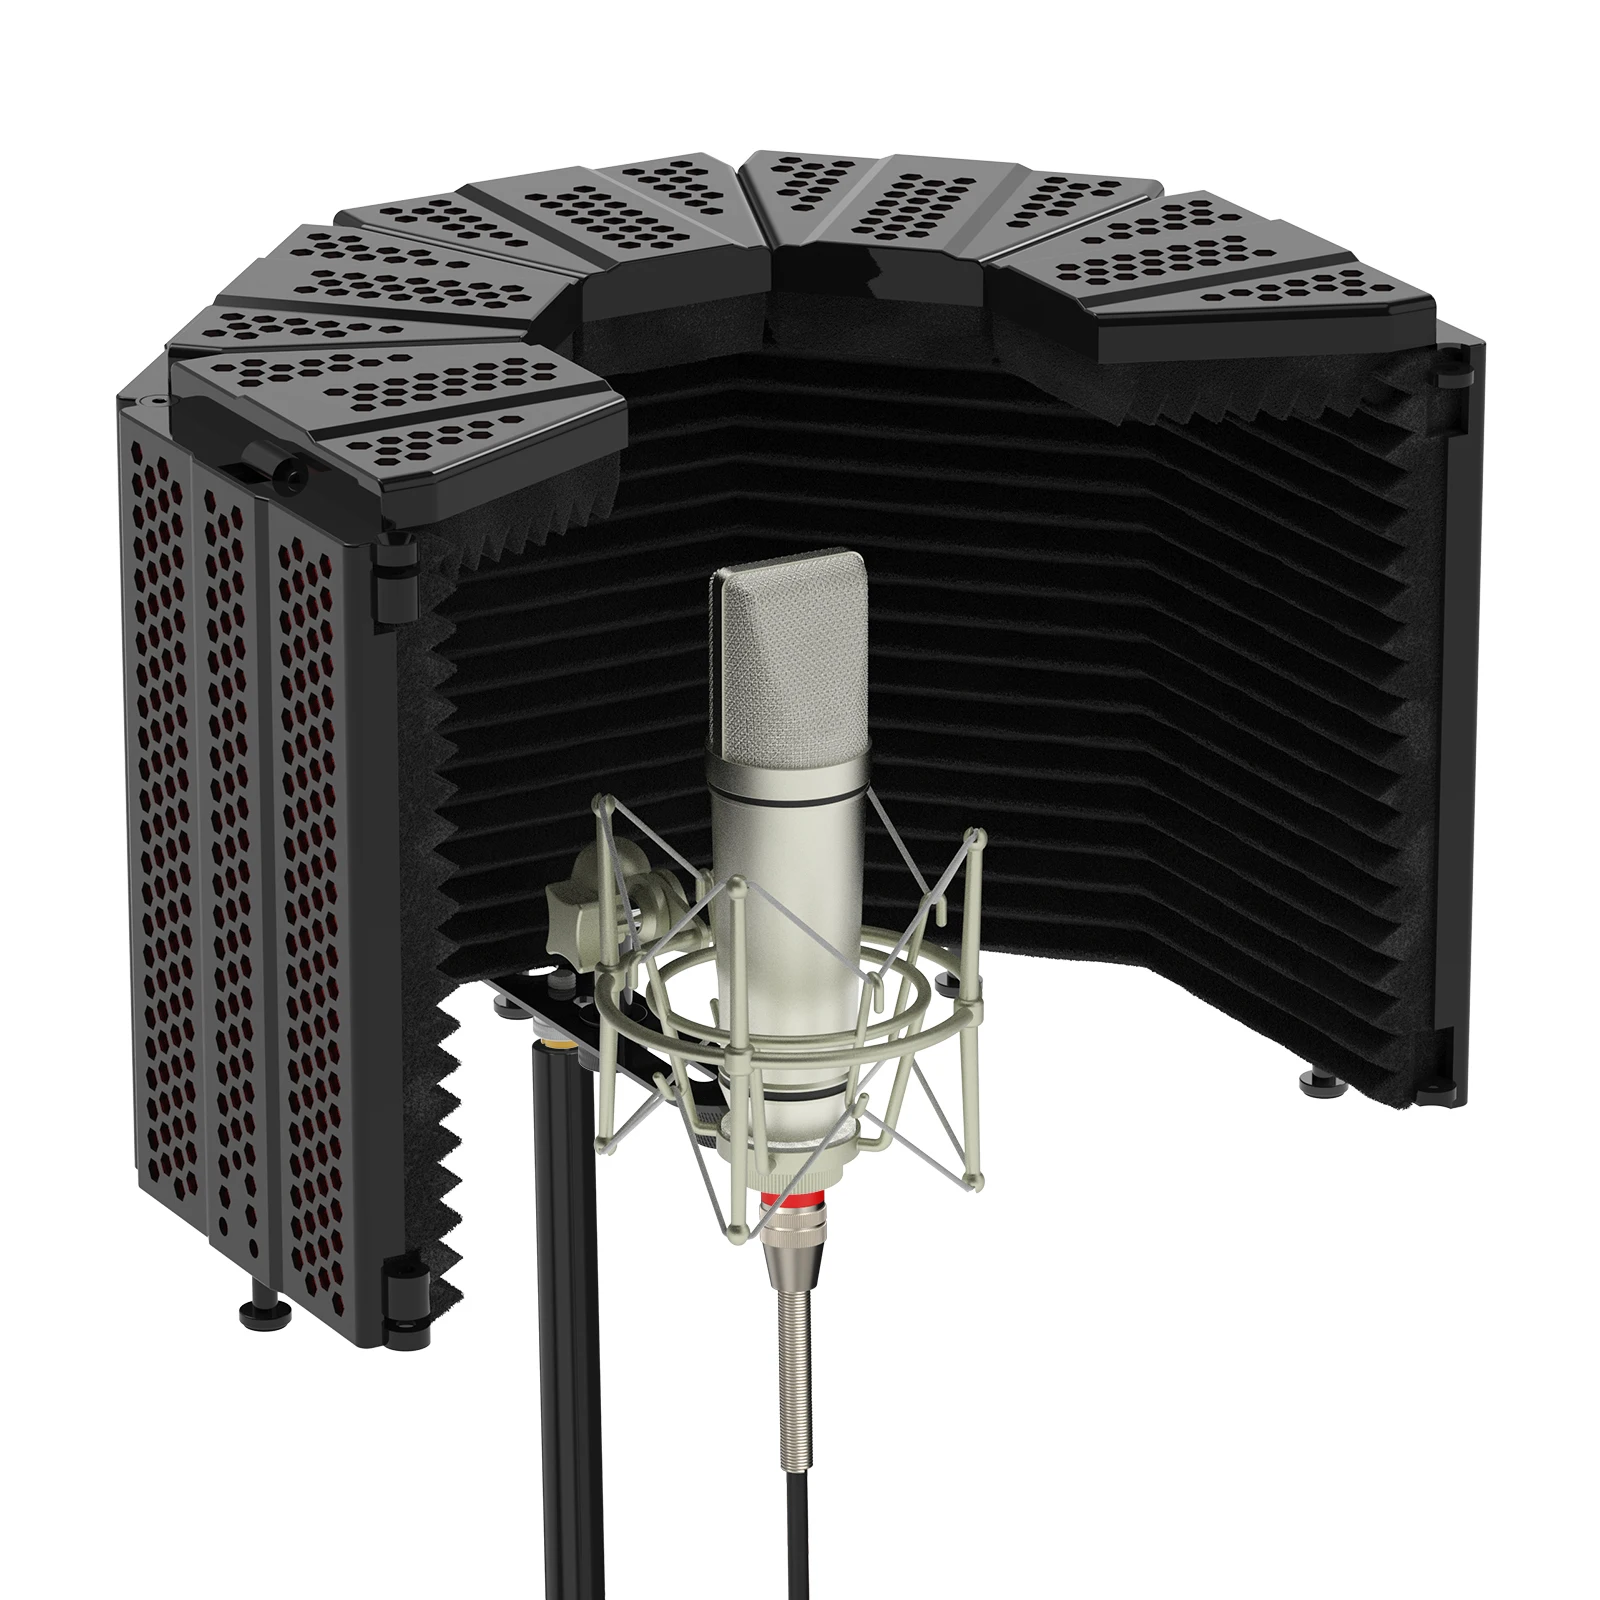 Studio metal logo printed anti-P OPfilter isolator sponge vocal anti noise reflection wind shield isolated microphone windshield